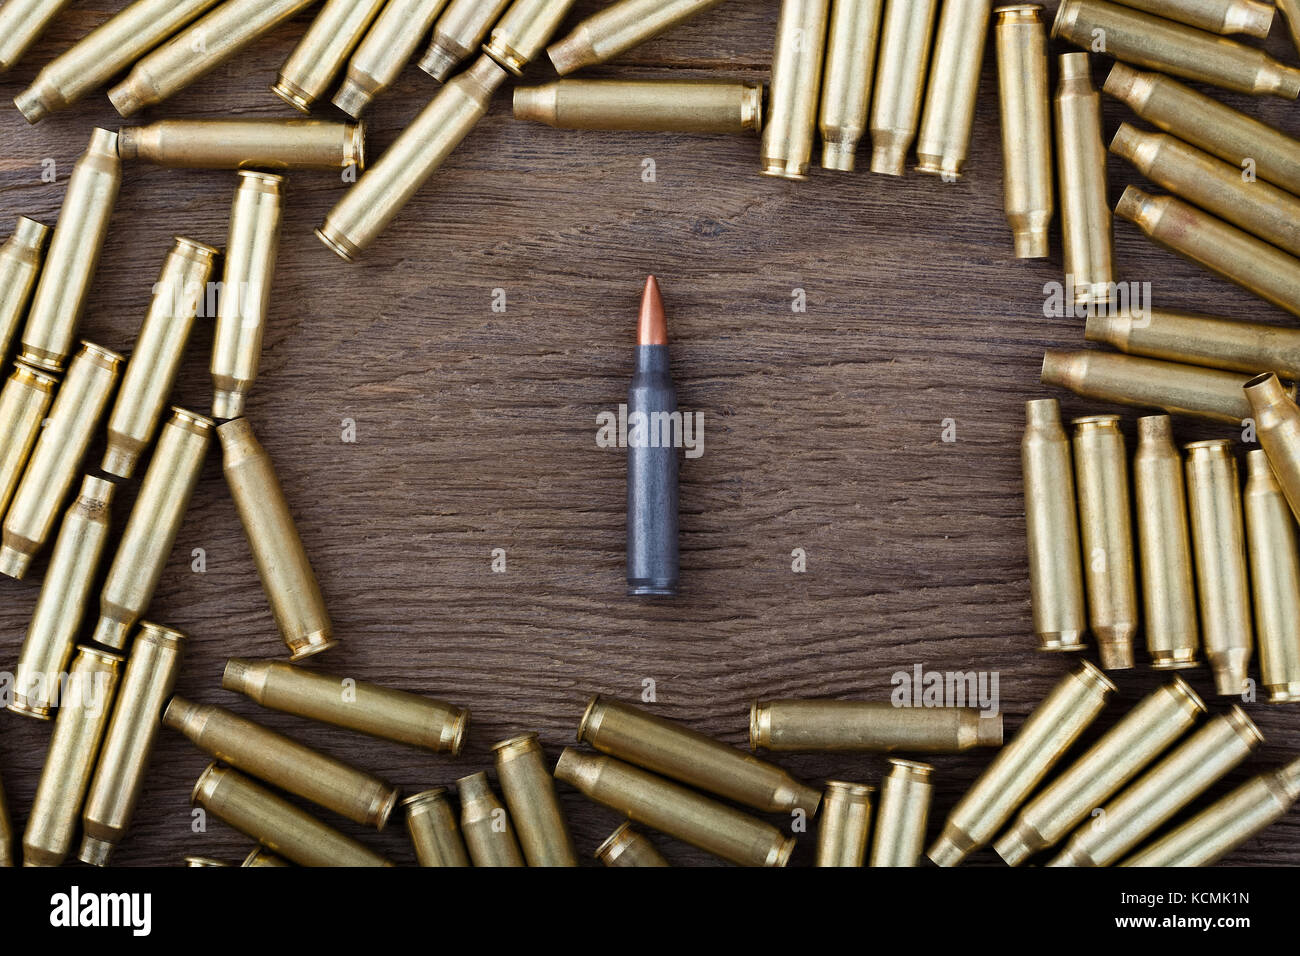 Ak-47 cartridges on wooden table close-up. Stock Photo